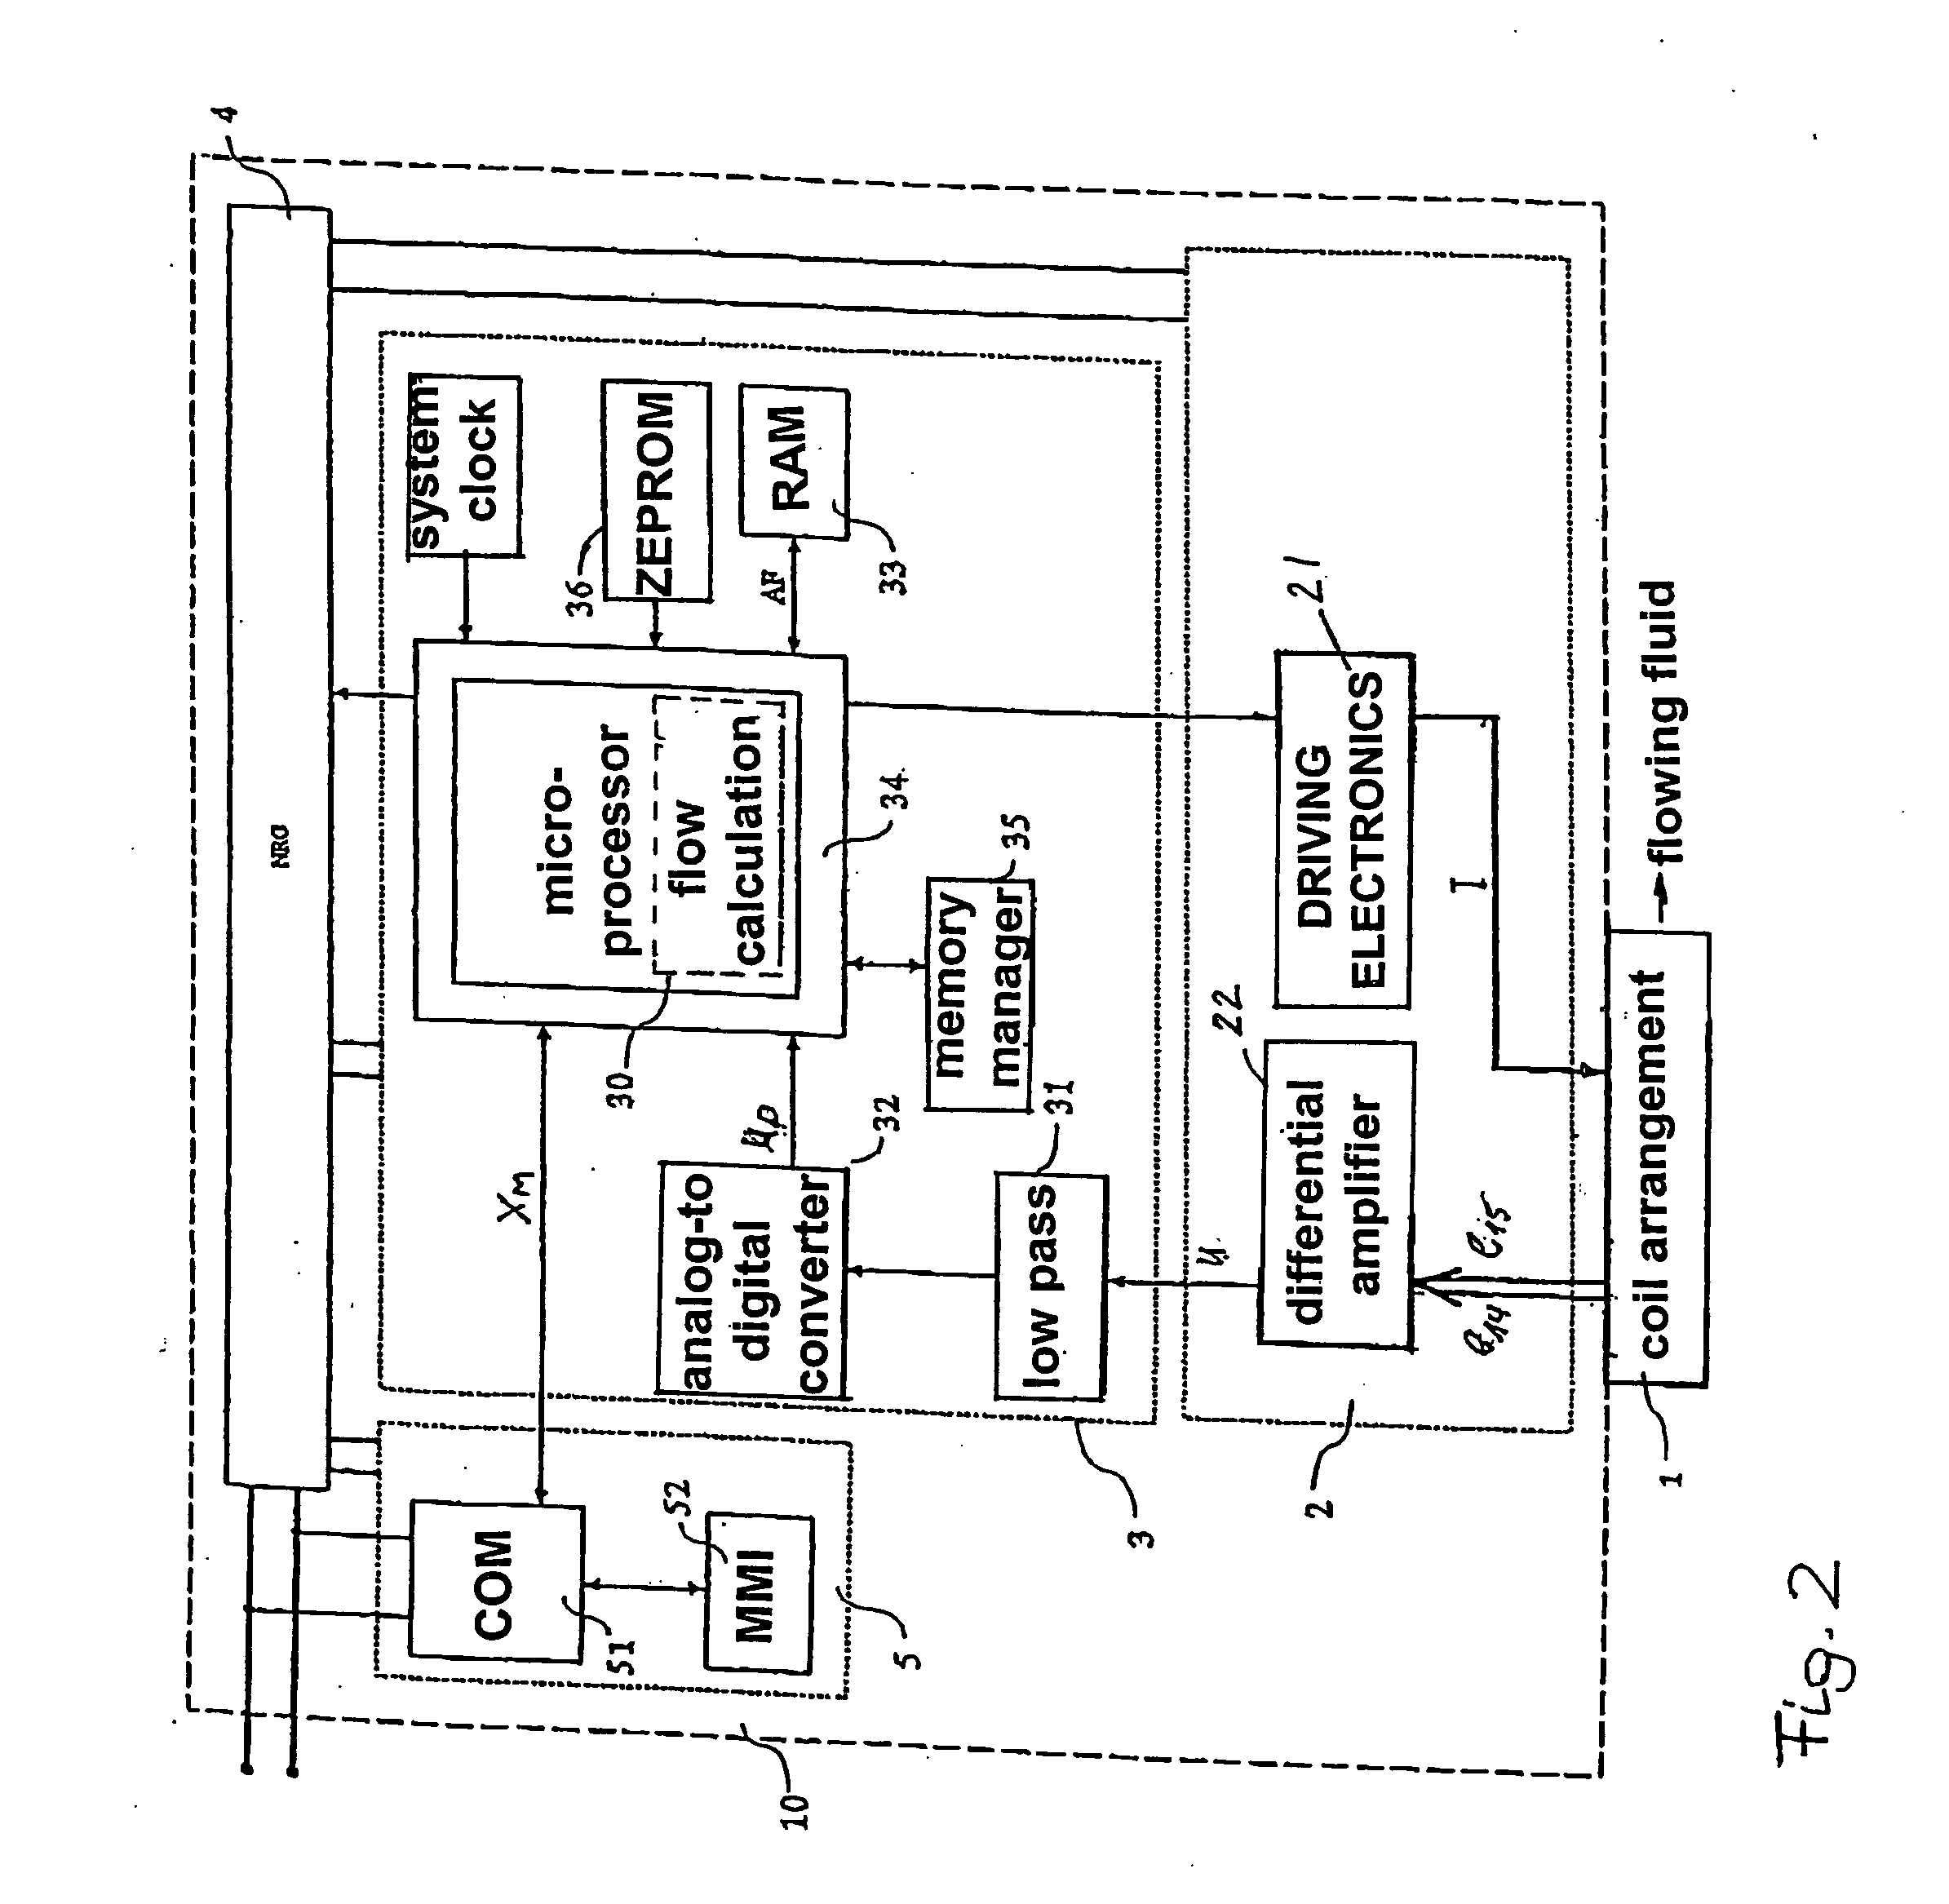 Method for operating and/or reviewing a magneto-inductive flow meter